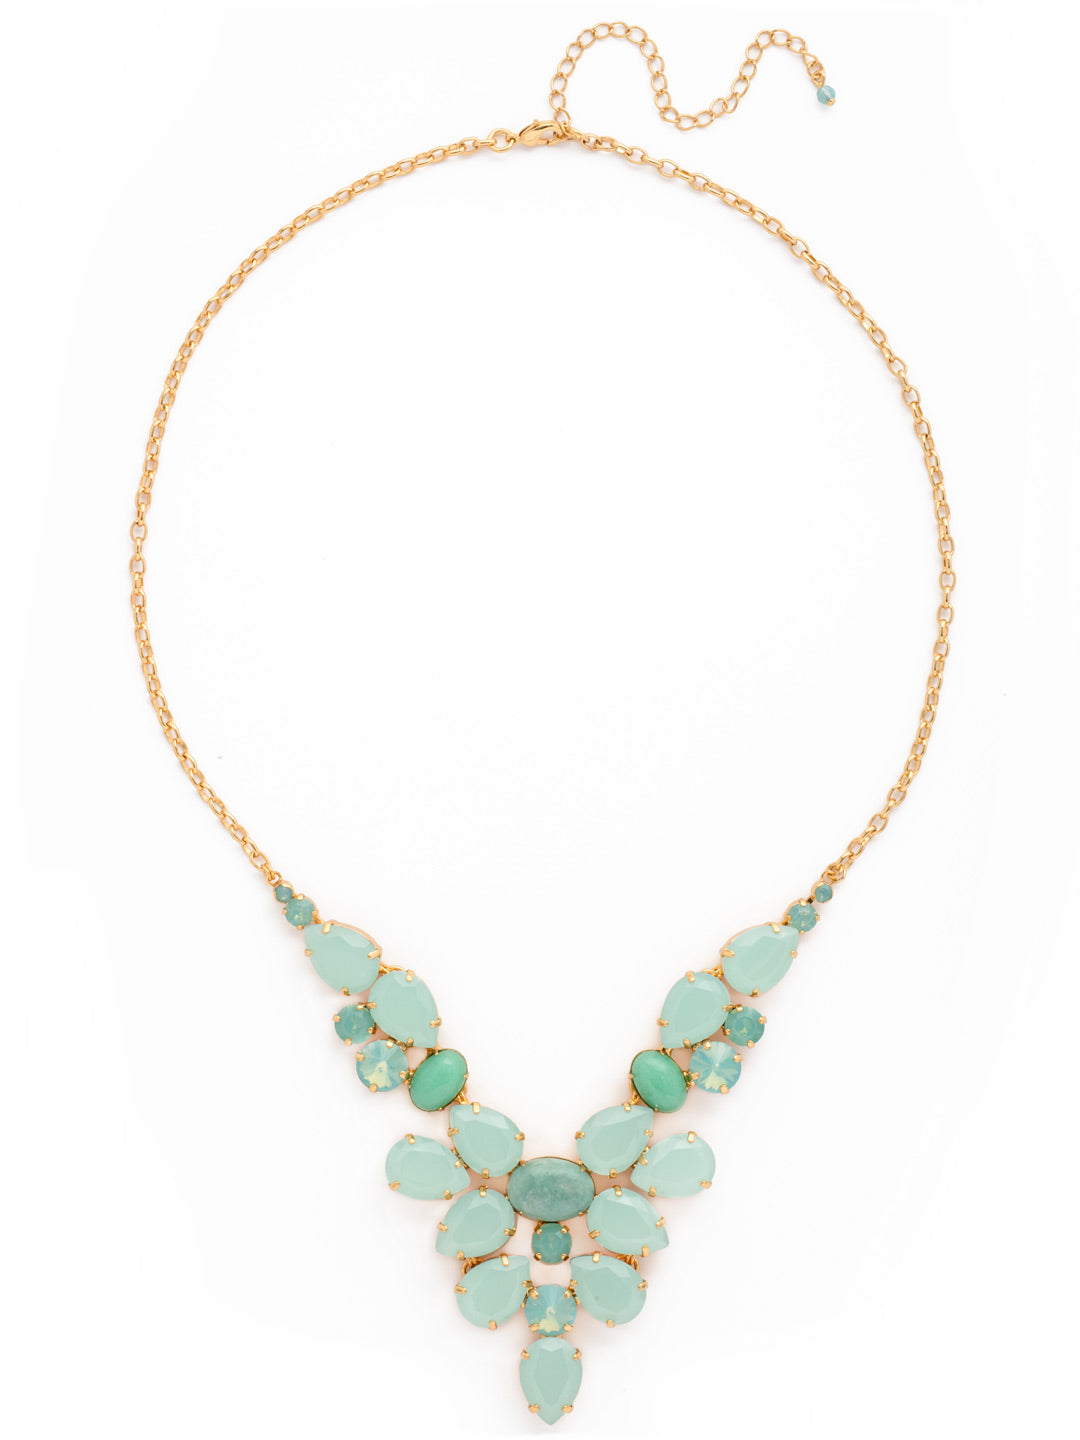 Chambray Statement Necklace - NDE59BGPAC - <p>Our Chambray Statement Necklace has it all! Semi-precious stones sprinkled throughout clusters of round and pear-shaped crystals makes for an unforgettable bib necklace. From Sorrelli's Pacific Opal collection in our Bright Gold-tone finish.</p>